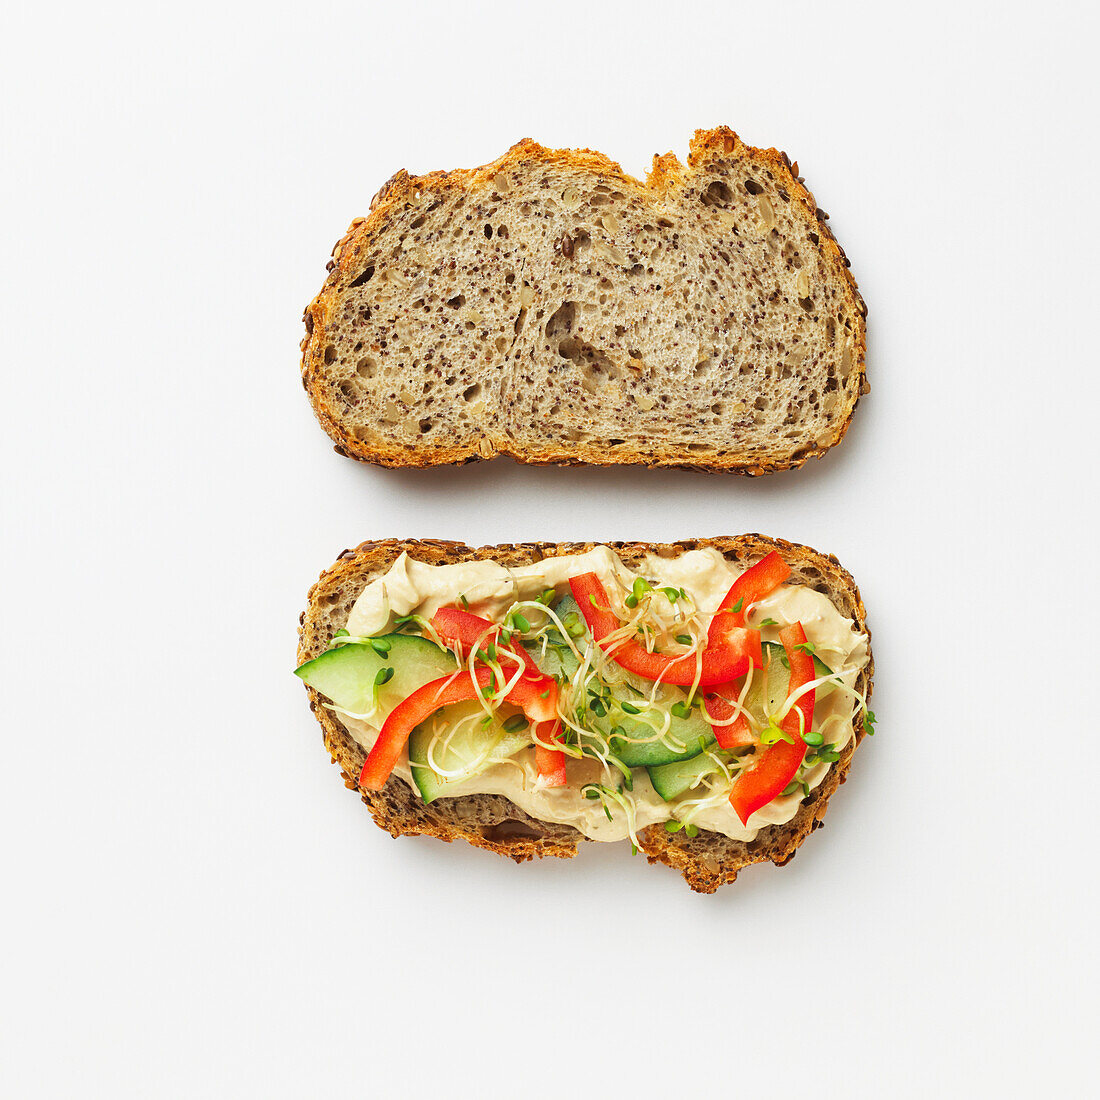 Seeded bread sandwich with vegetables, sprouts and hummus